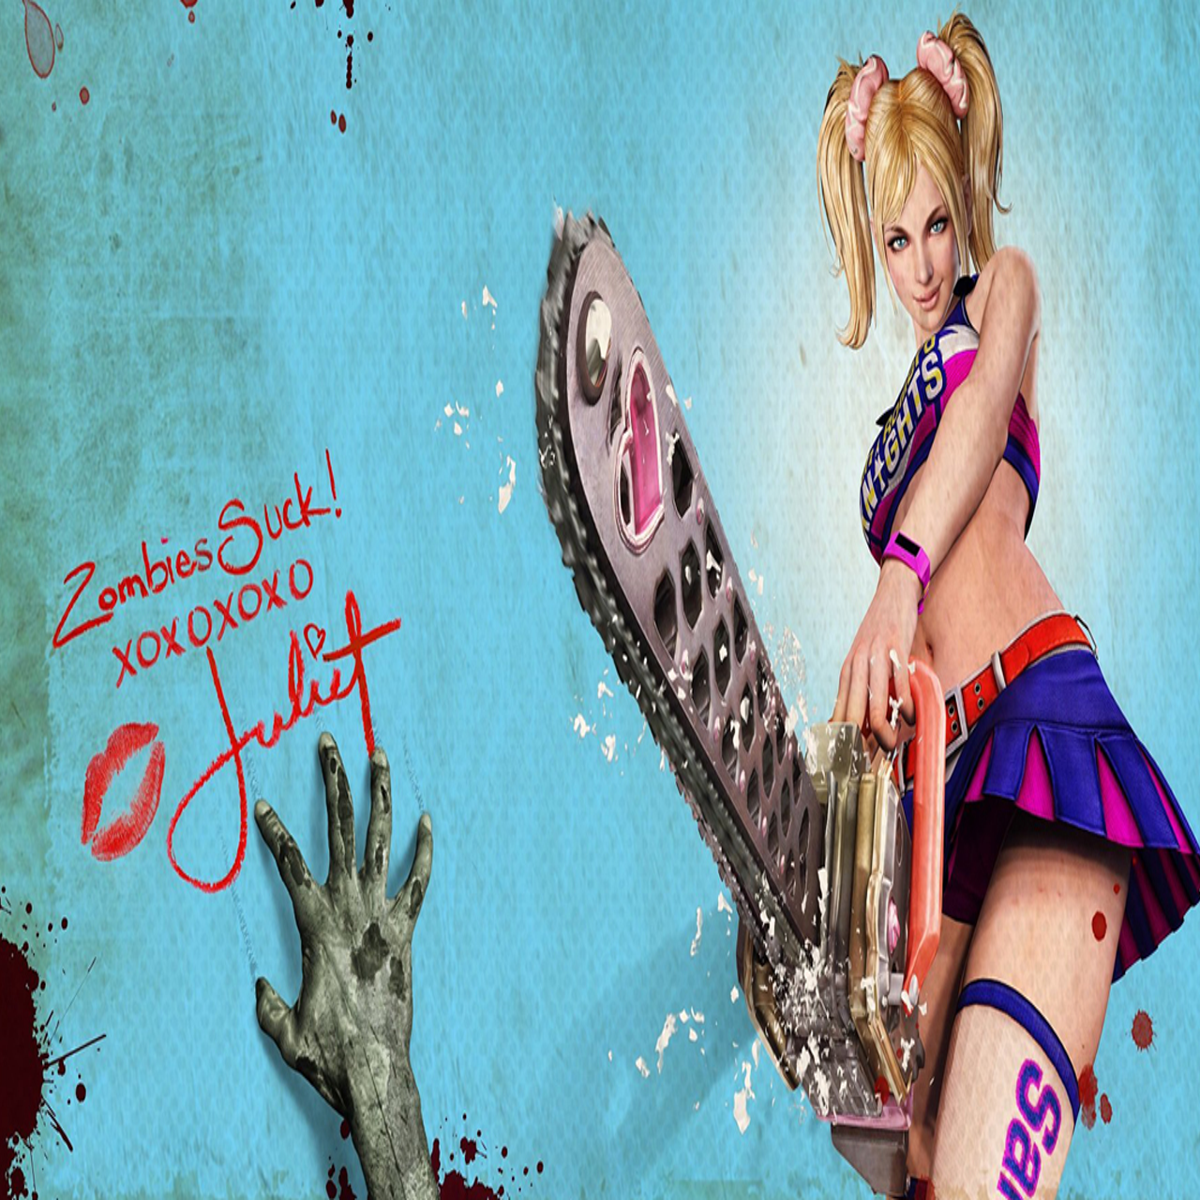 A return for Lollipop Chainsaw is on the horizon : r/PS5